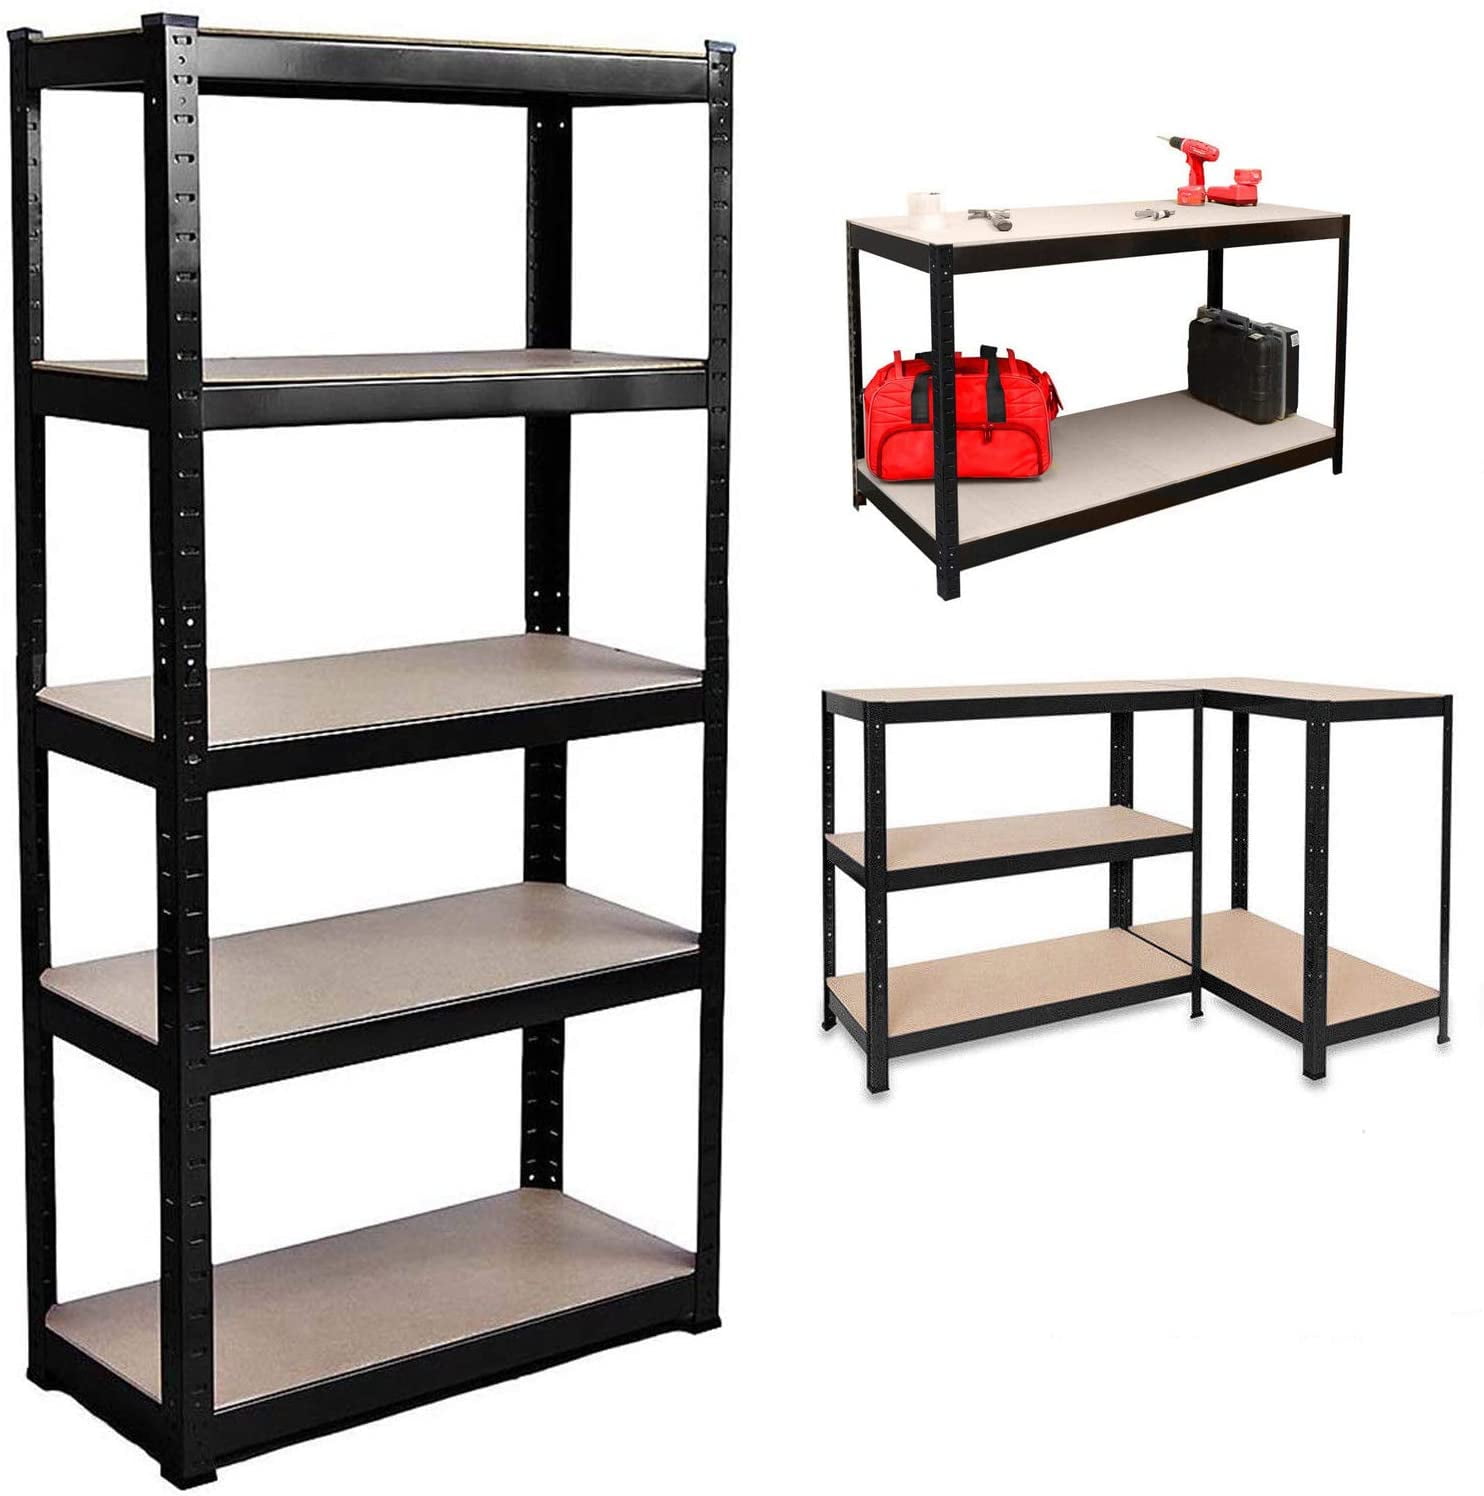 2 Bays Shelving Unit for Garage and Sheds 5 Tier Metal Racking Shelf Unit Storage Shelves Unit Heavy Duty Strong Industrial Tall Large Red 90cm x 40cm x 180cm